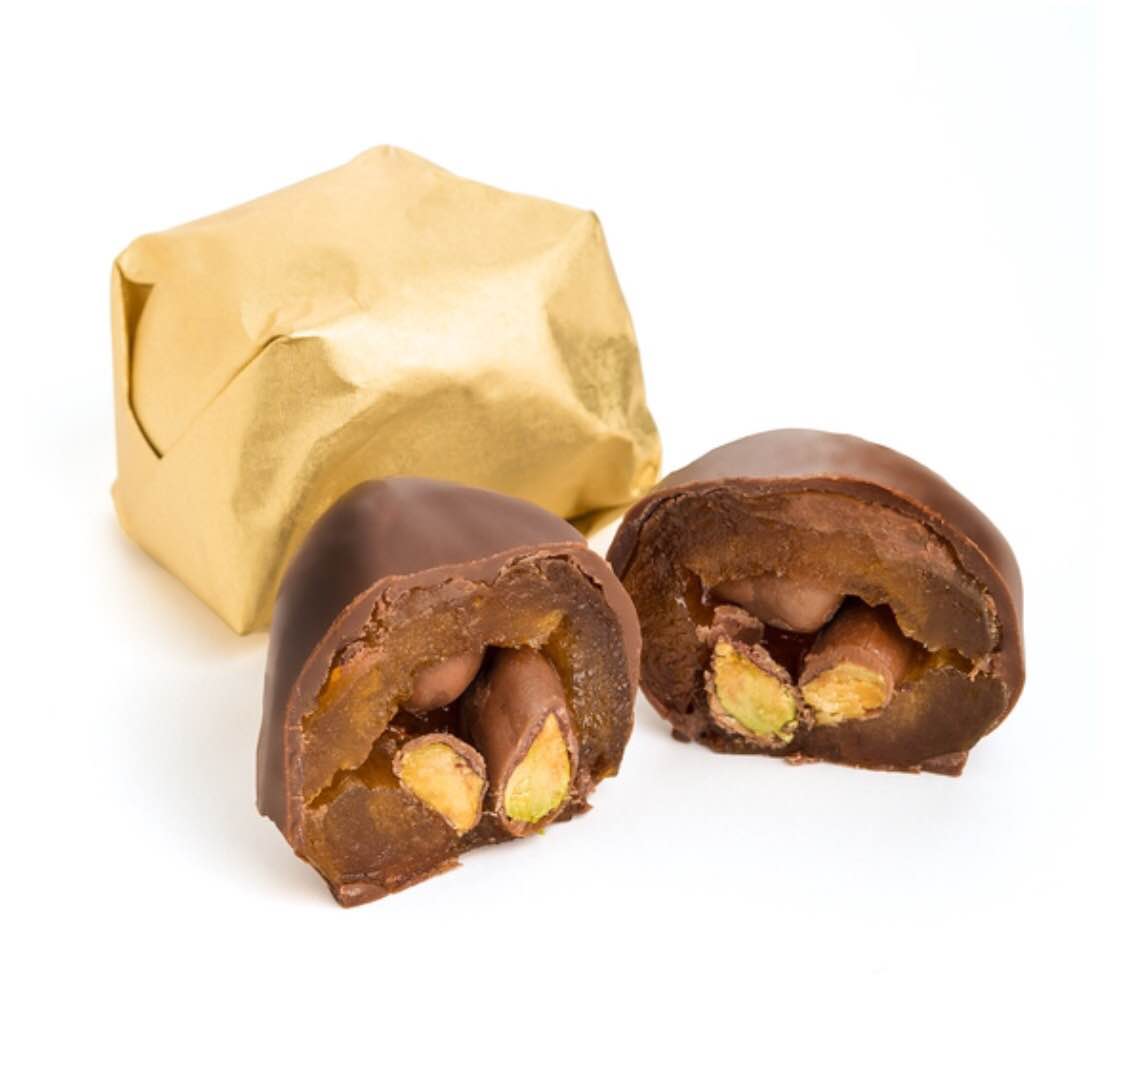 CHOCOLATE COVERED APRICOT FILLED WITH PISTACHIOS